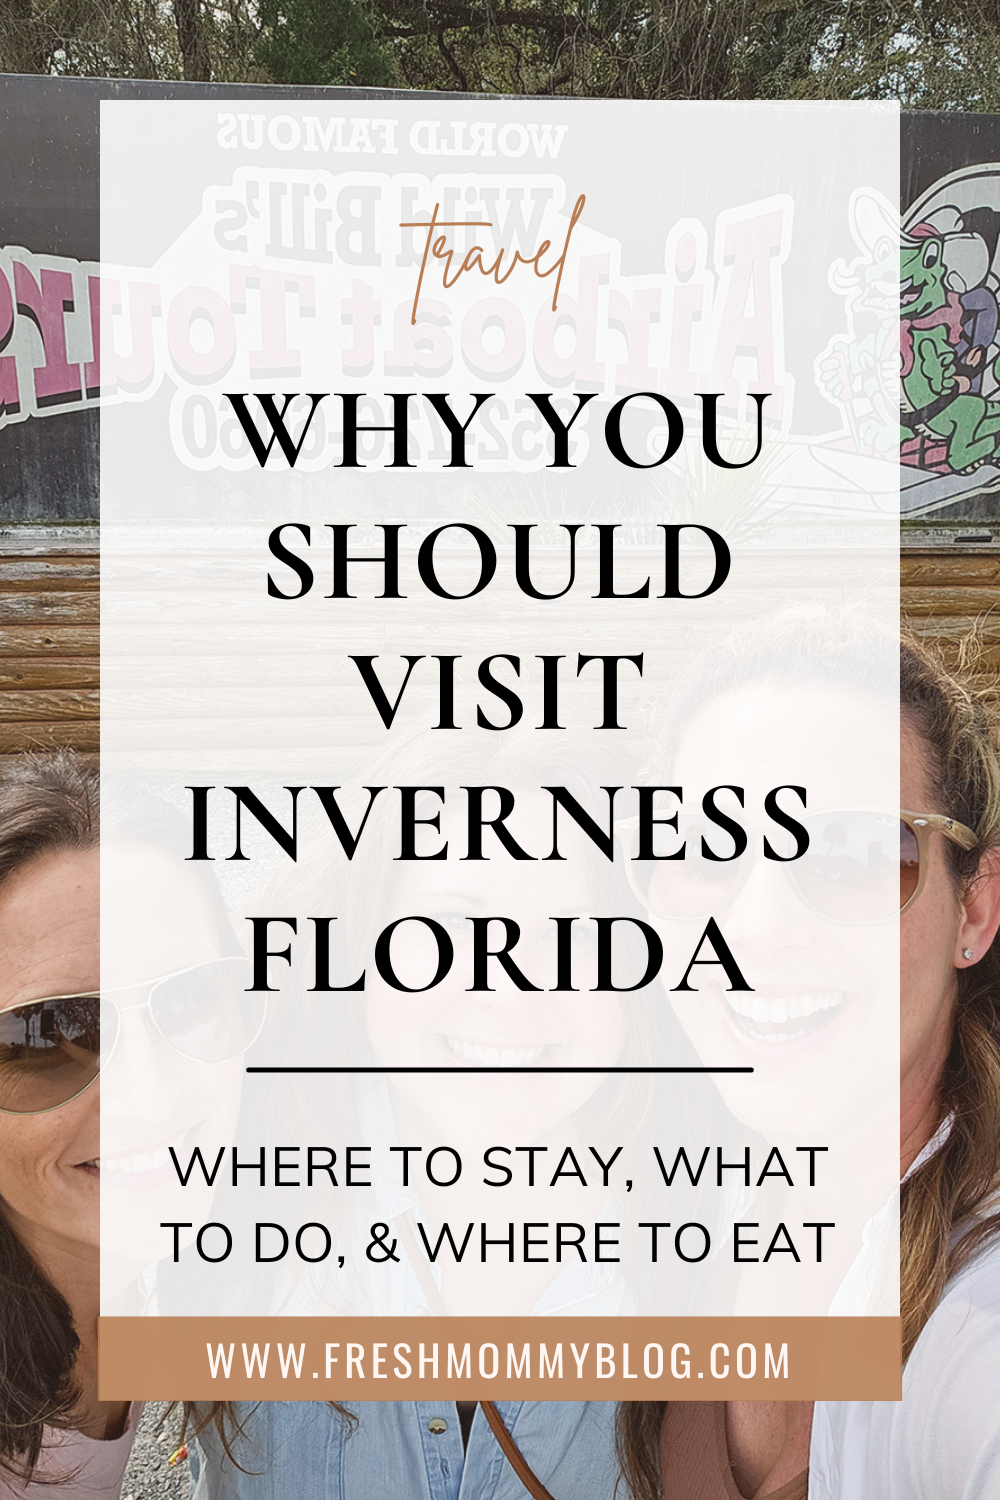 Why you should visit Inverness Florida. Where to stay, what activities to do and all the good spots to eat.